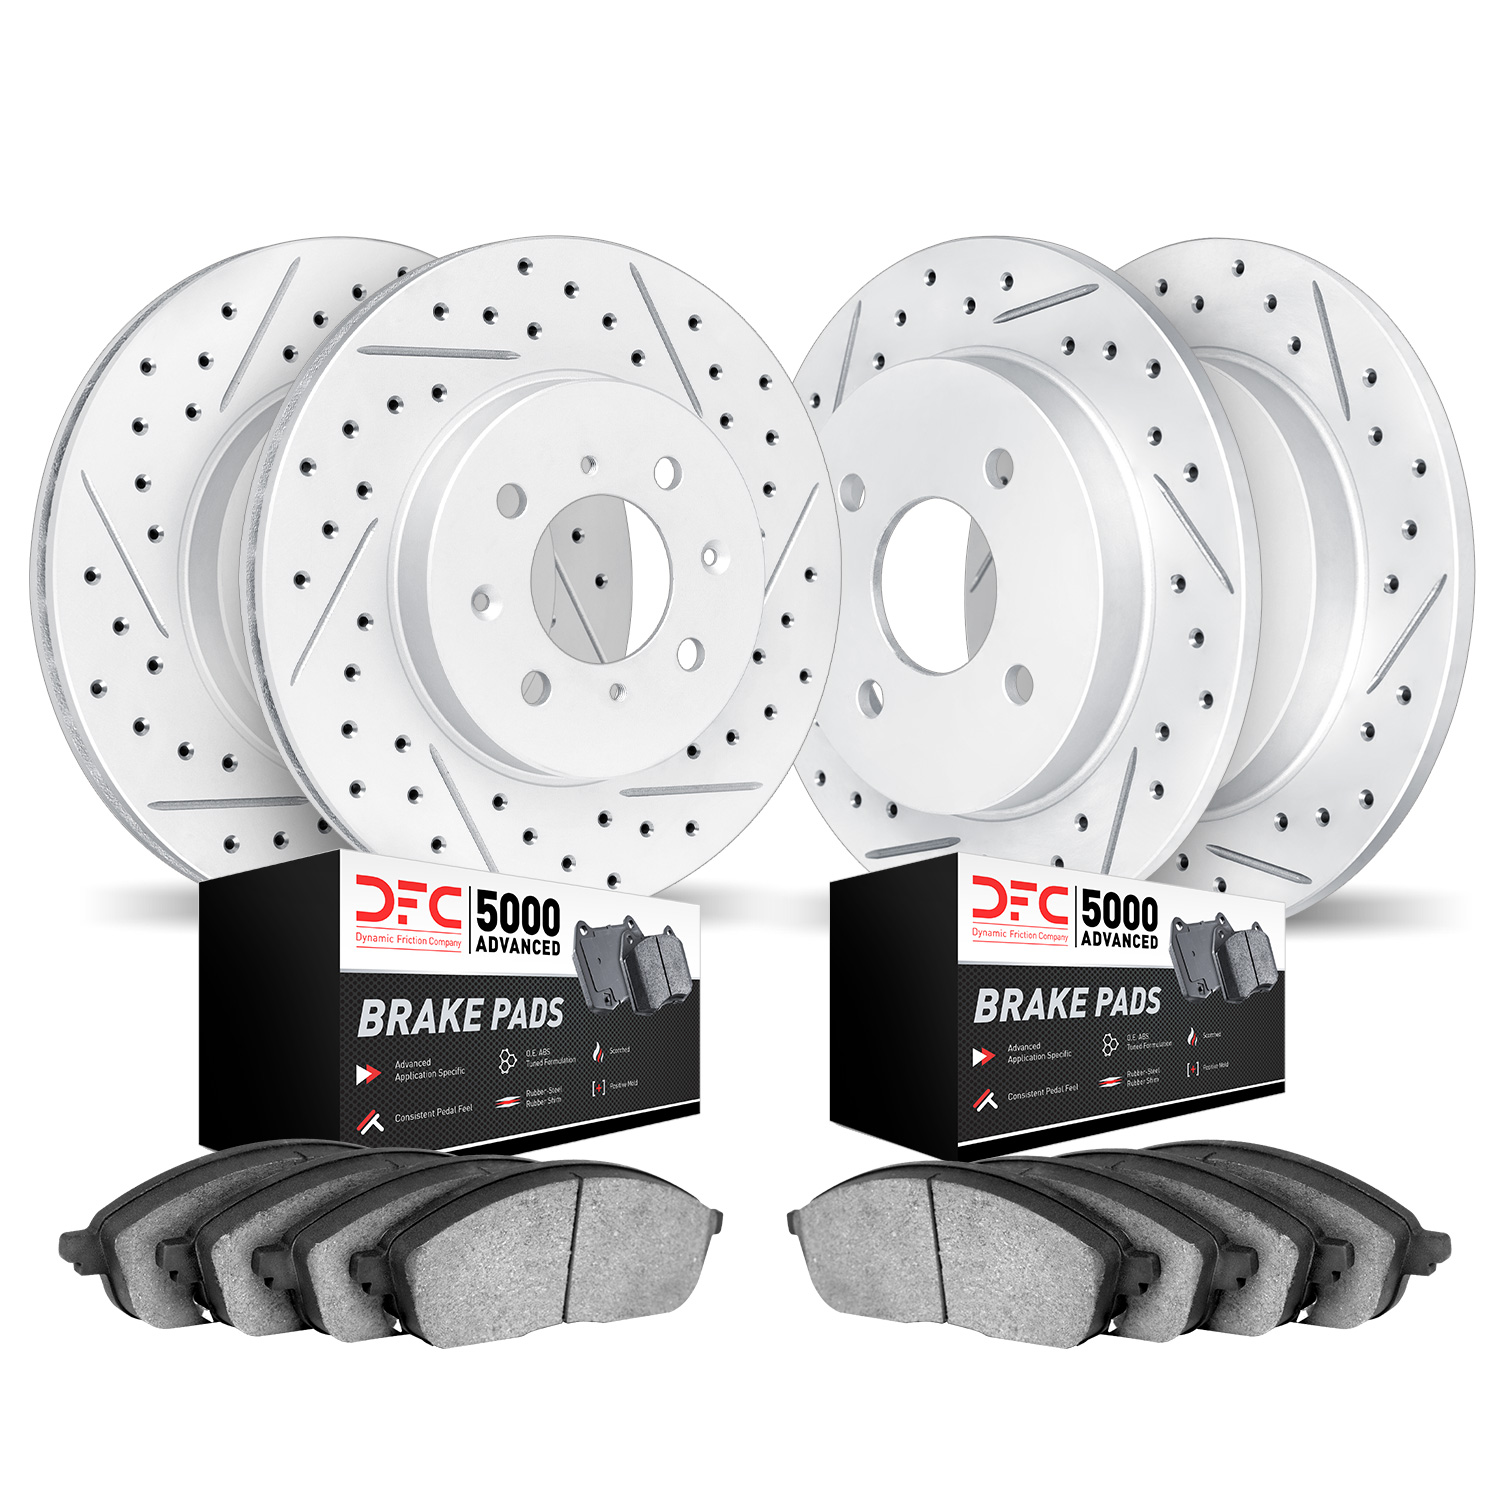 2504-47257 Geoperformance Drilled/Slotted Rotors w/5000 Advanced Brake Pads Kit, 2014-2016 GM, Position: Front and Rear